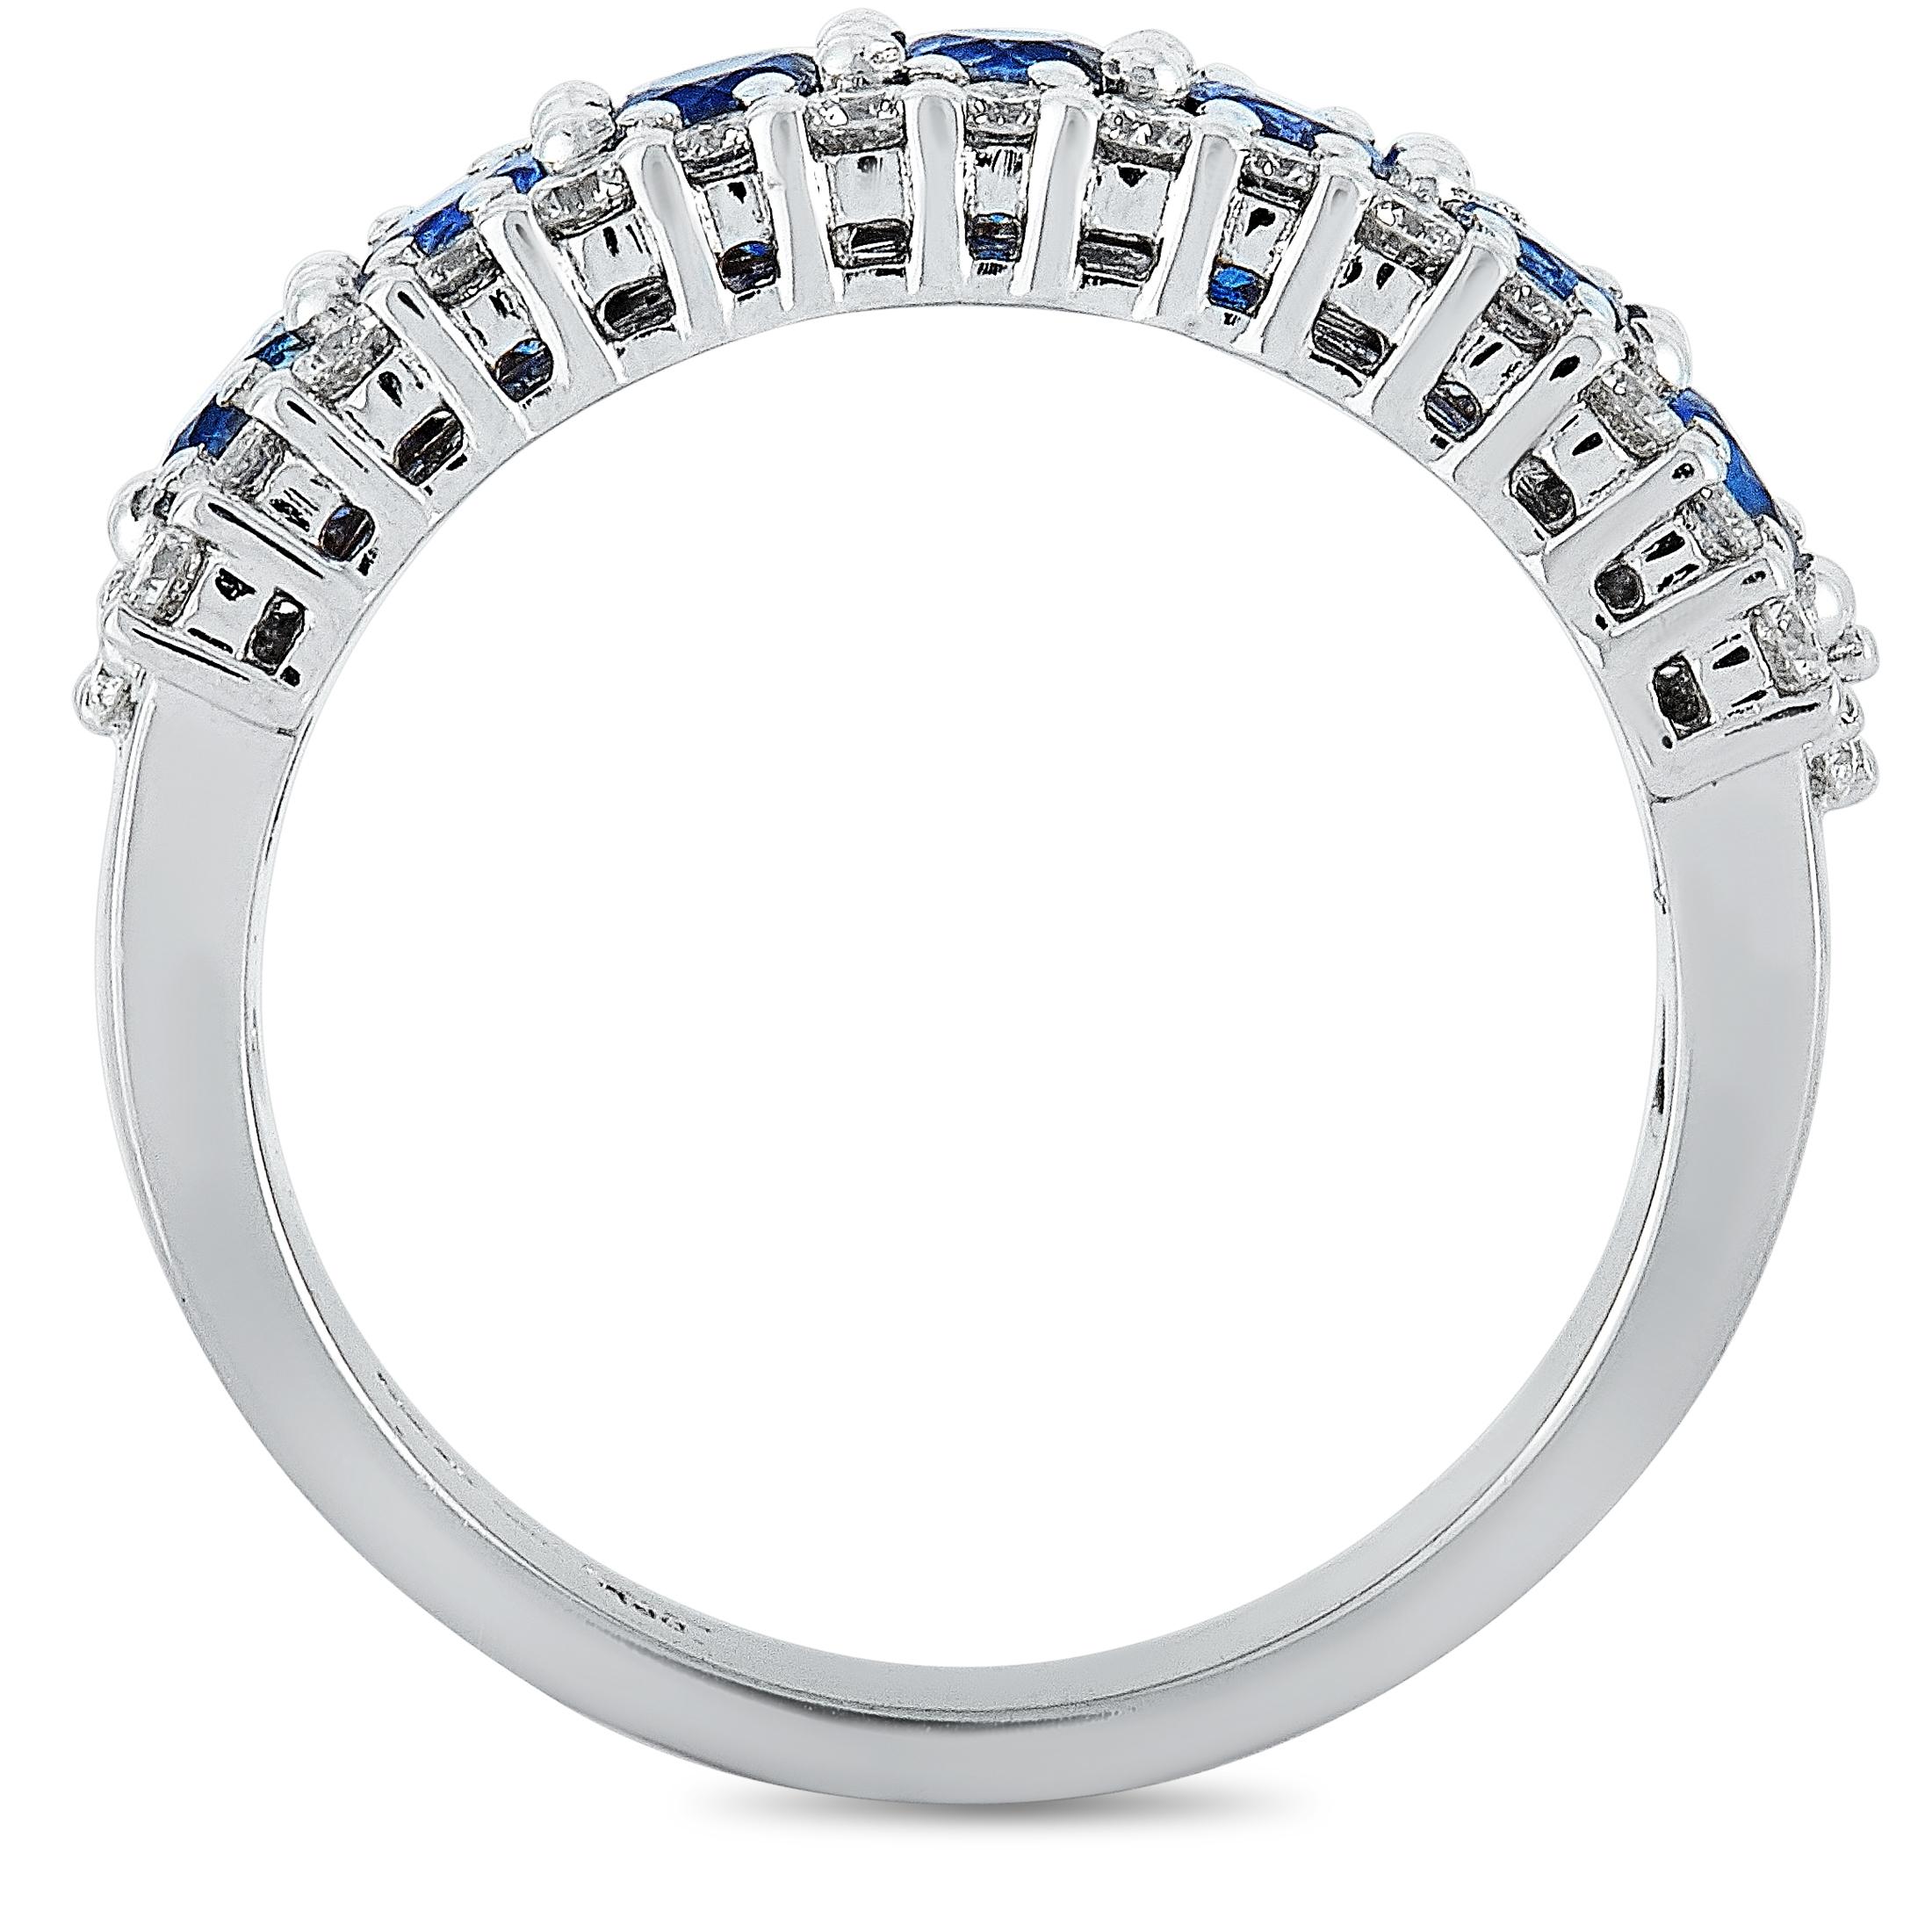 This Oro Trend ring is crafted from 18K white gold and set with diamonds and sapphires that total 0.85 and 1.47 carats respectively. The ring weighs 7.2 grams and boasts band thickness of 4 mm and top height of 3 mm, while top dimensions measure 21